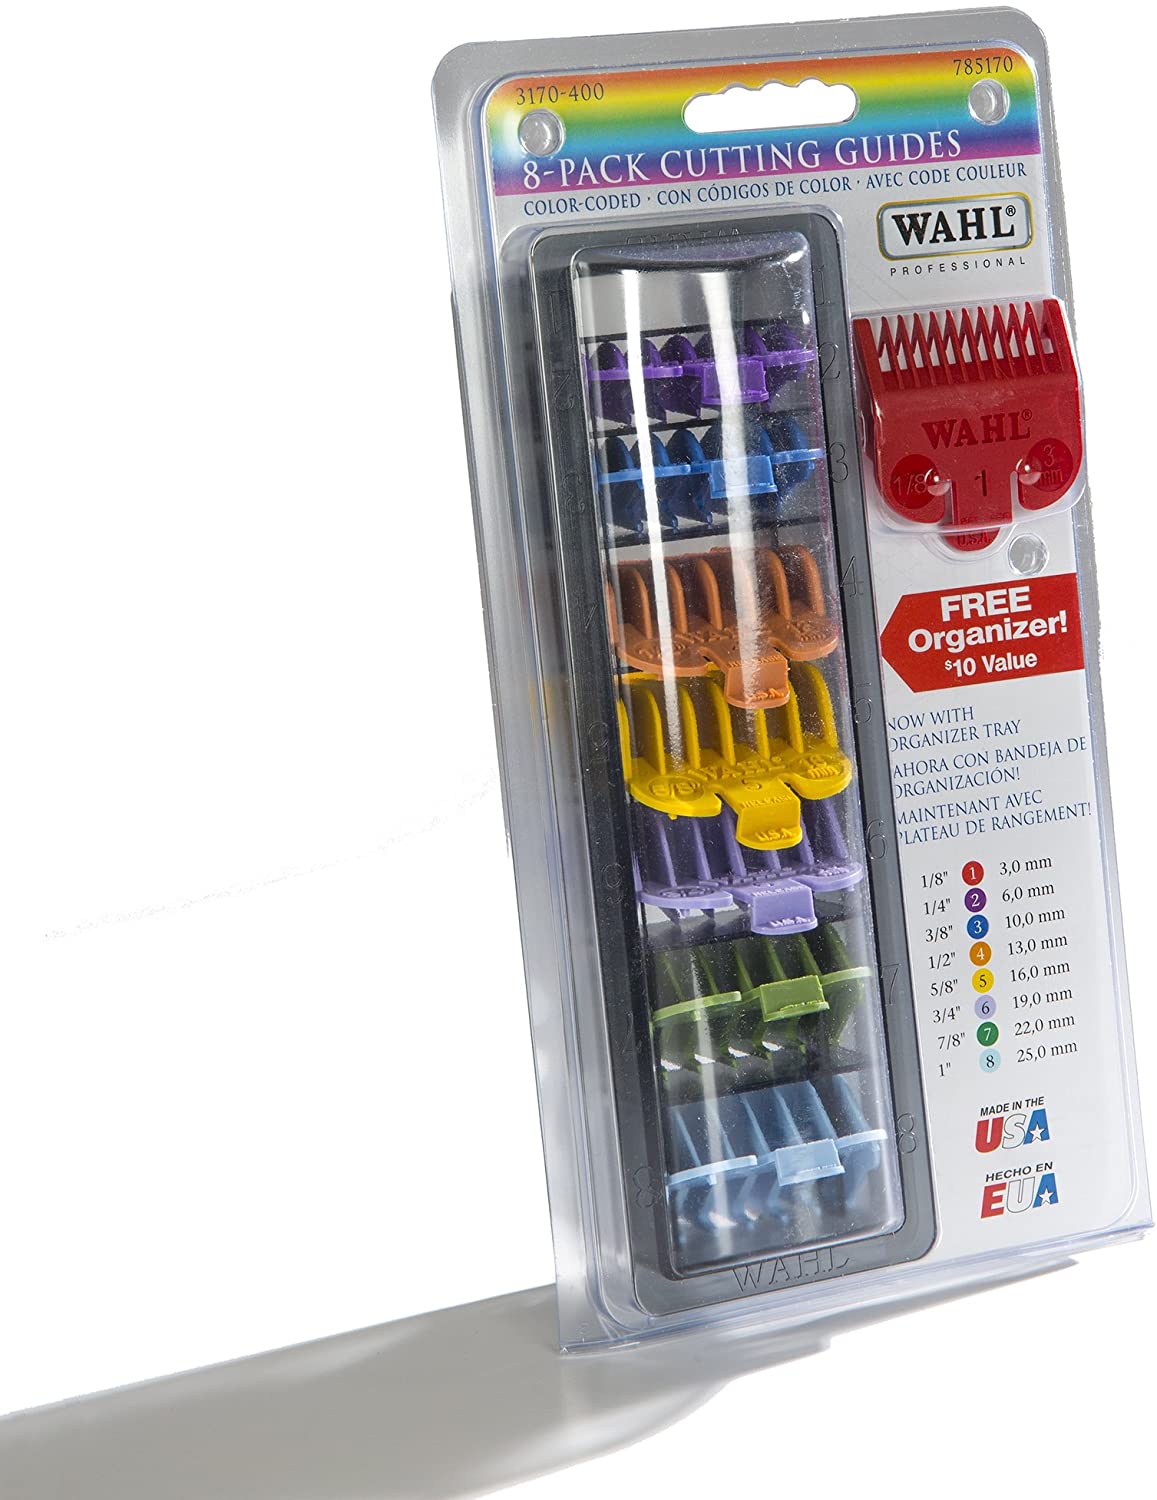 WAHL NO. 1-8 COLOUR CODED PLASTIC COMBS IN CADDY